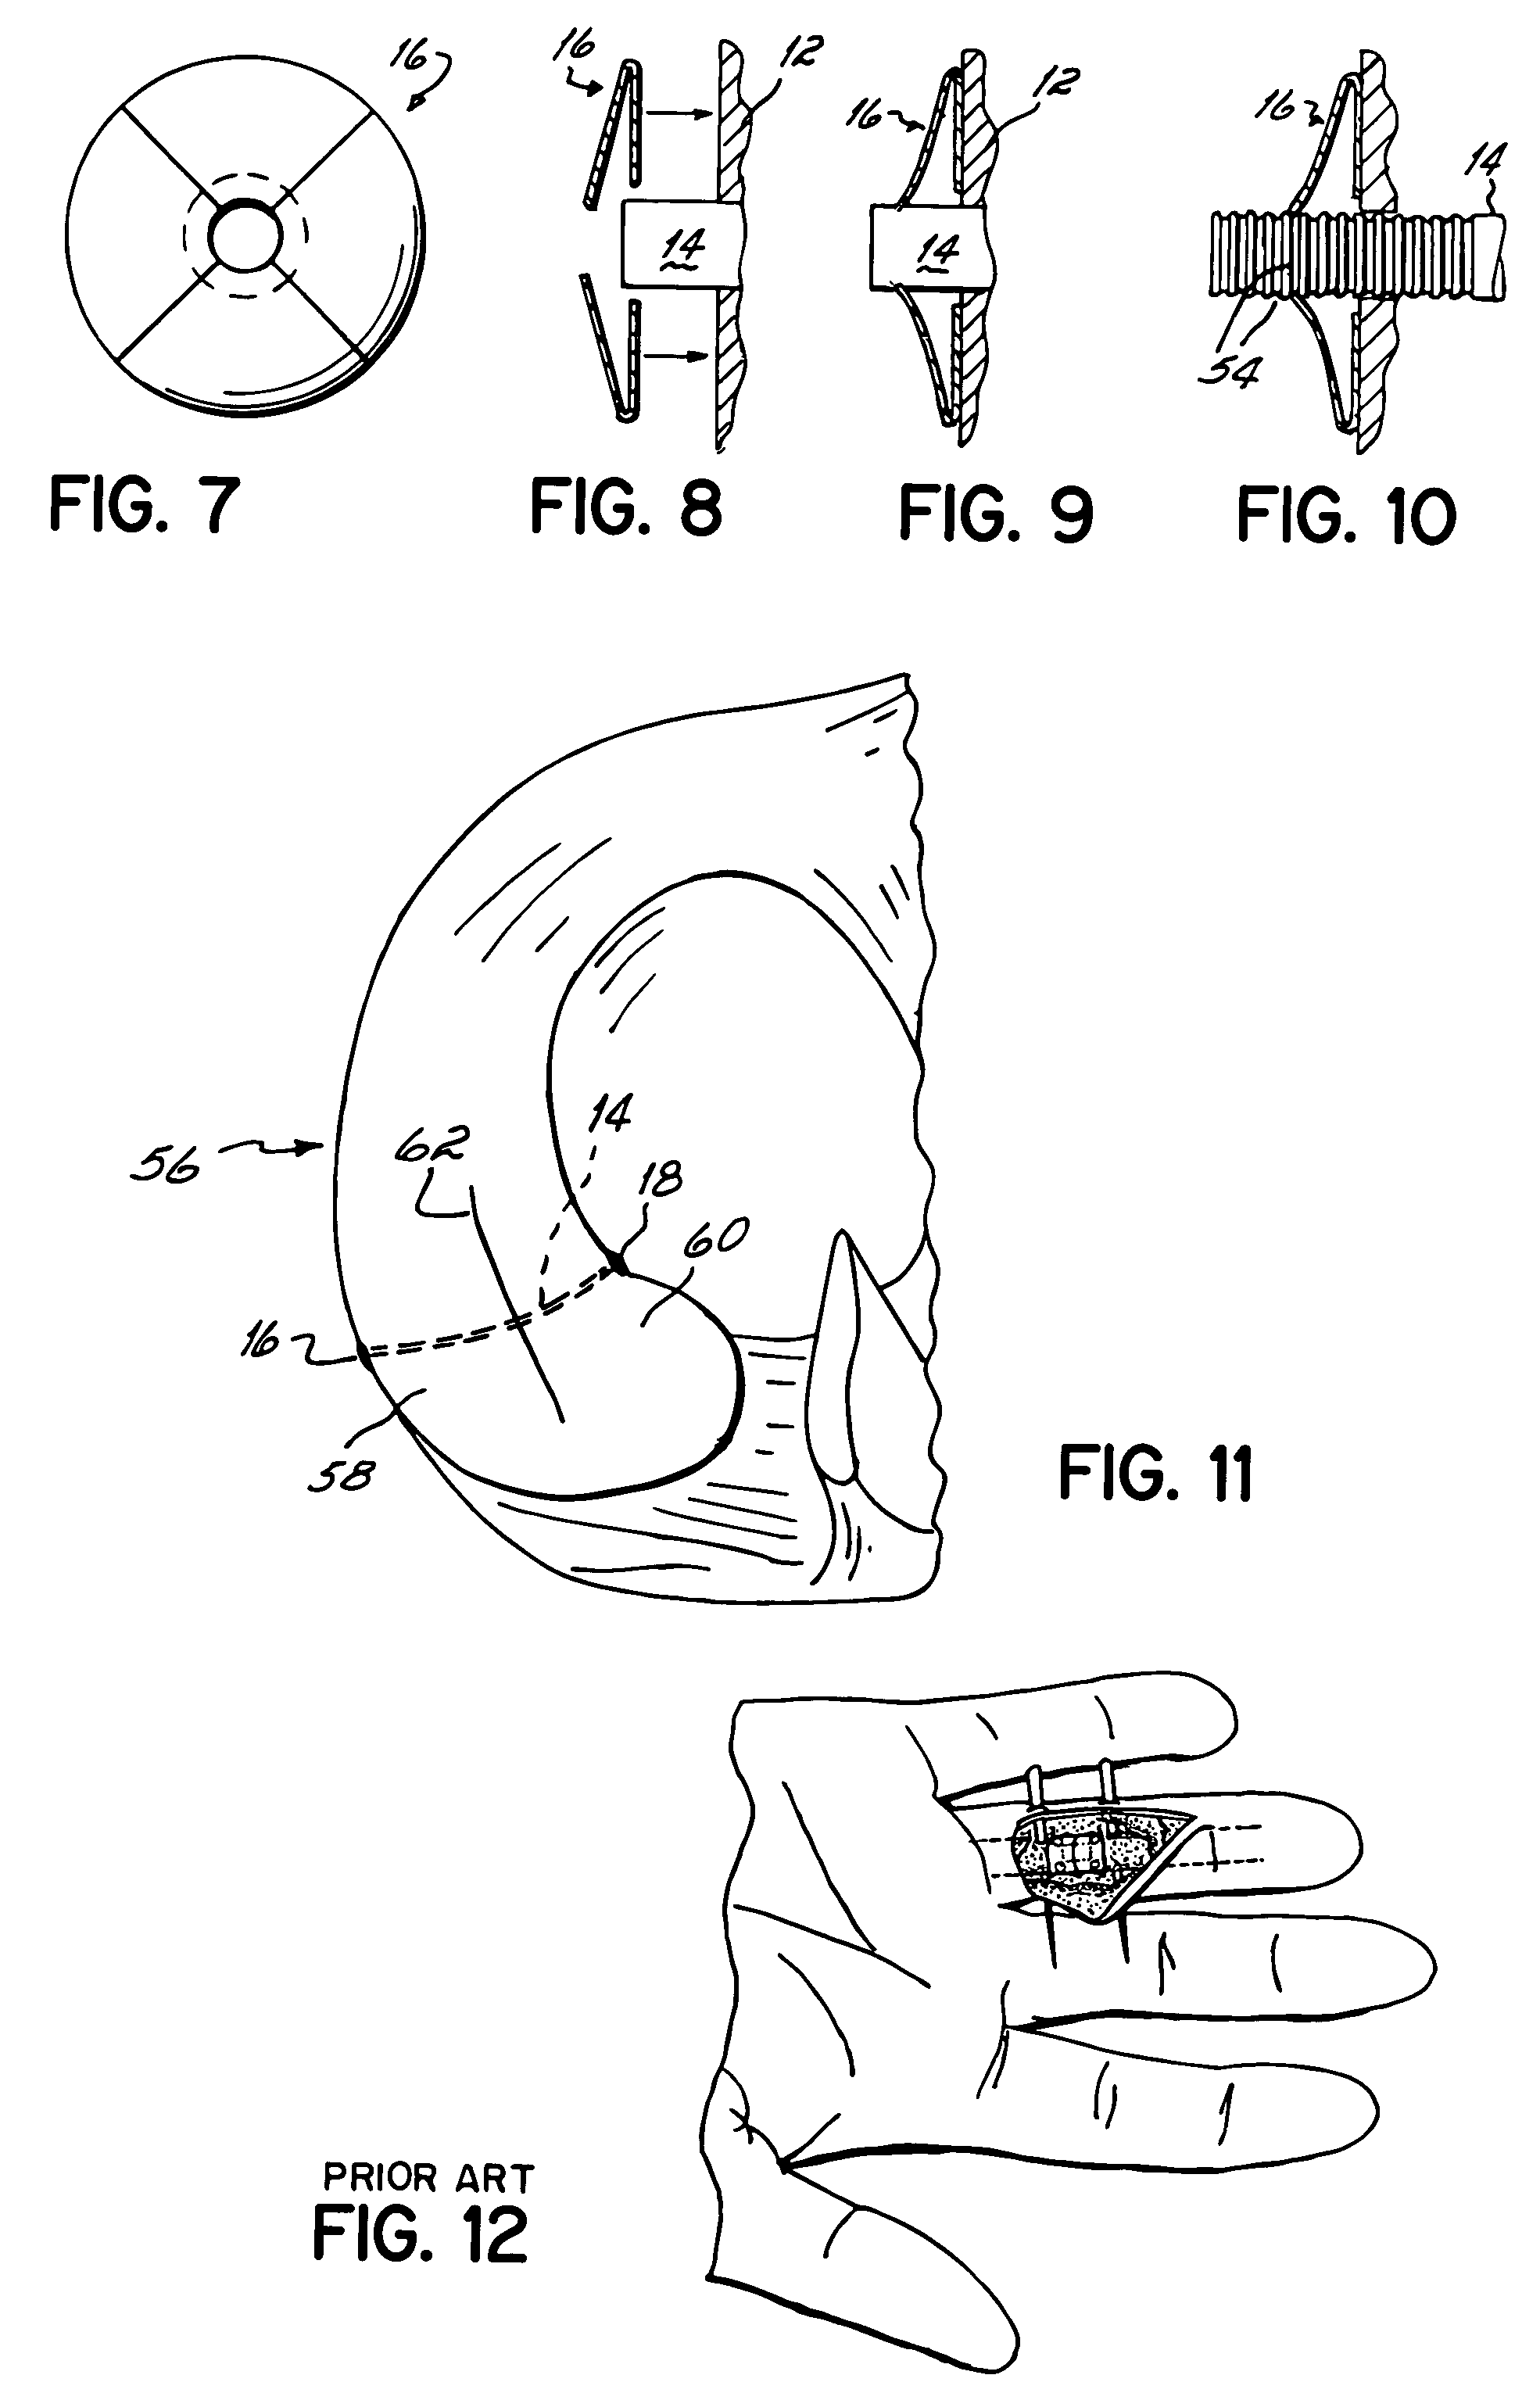 Apparatus and methods for securing tendons or ligaments to bone